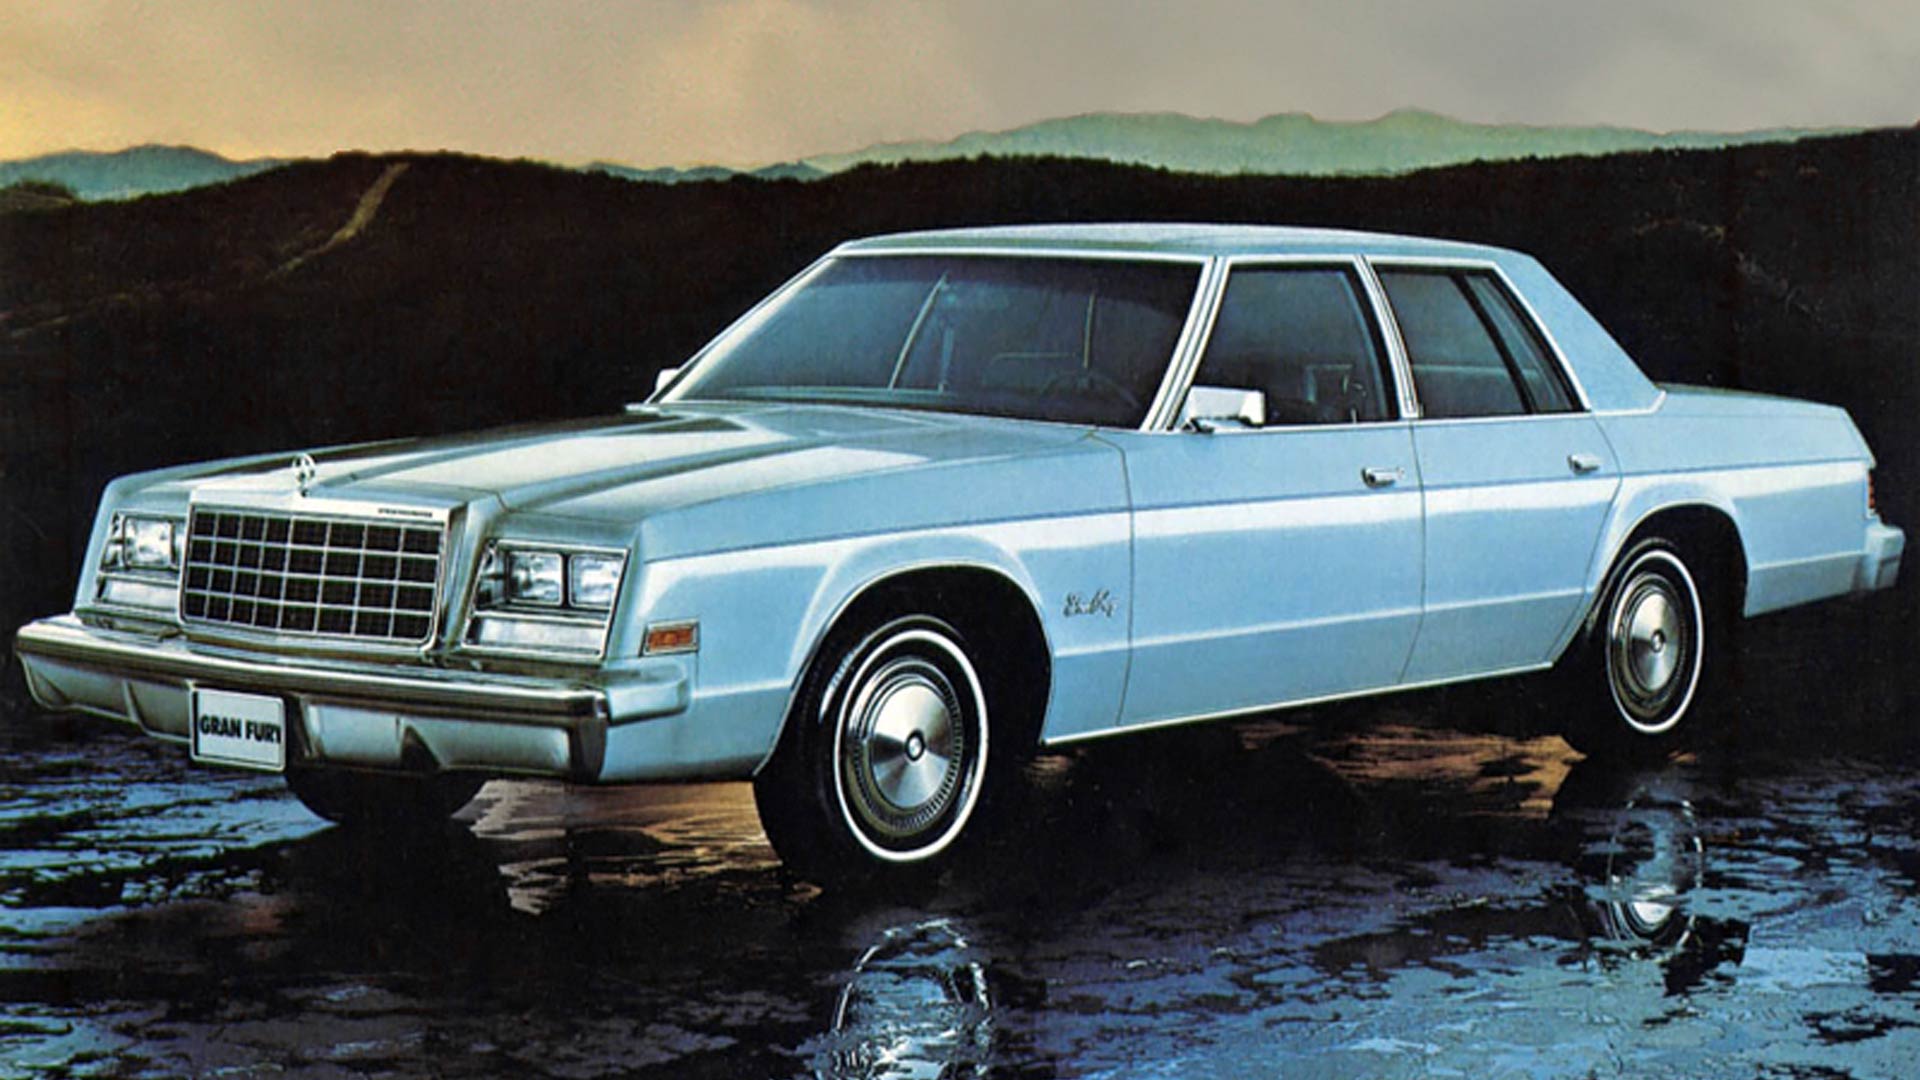 <p>For a significant period of its life, the Plymouth Gran Fury existed to satisfy the demands of the fleet market, and this lifeline kept it alive. It may have been downsized for 1980, but this is still a huge vehicle.</p> <p>Police chiefs loved them, with a special package offered to up the 5.9-liter (360-cubic inch) V8 engine to a ‘massive’ 195hp. By 1980, the land yacht era had capsized, and Plymouth ditched the Gran Fury part-way through 1981.</p>